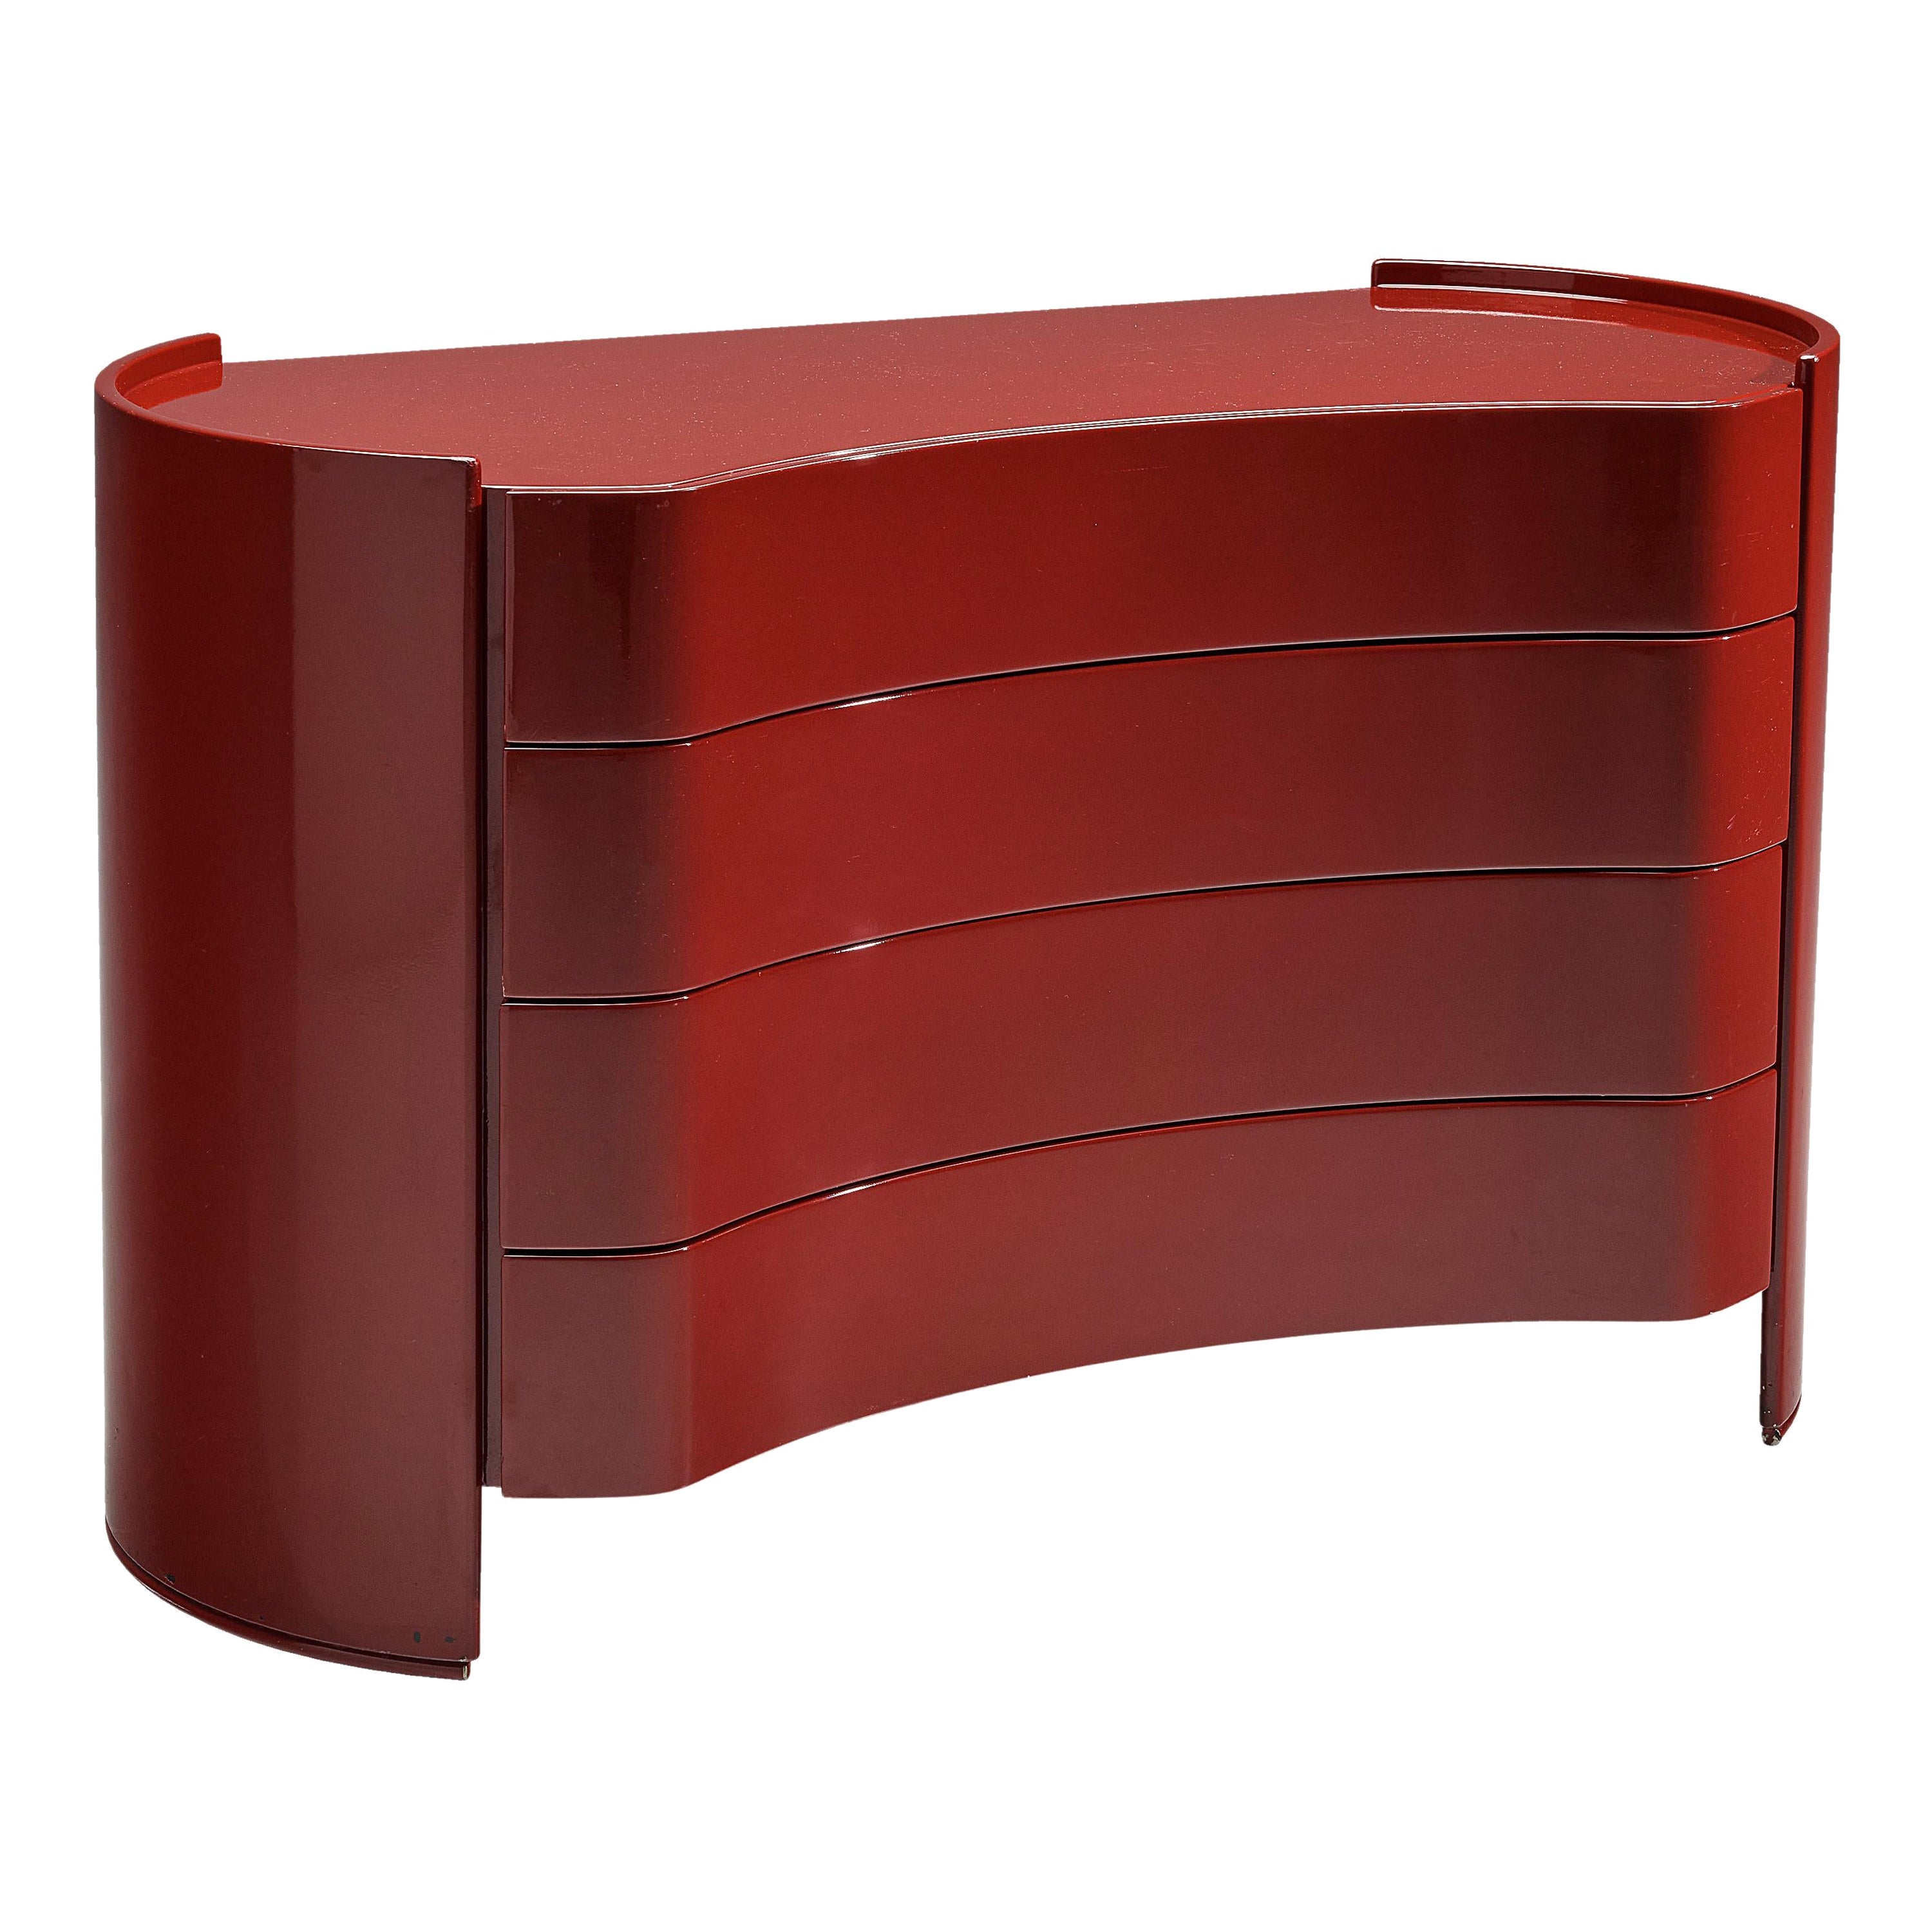 Curved Italian 'Aiace' Chest of Drawers in Red Lacquered Wood by Benatti